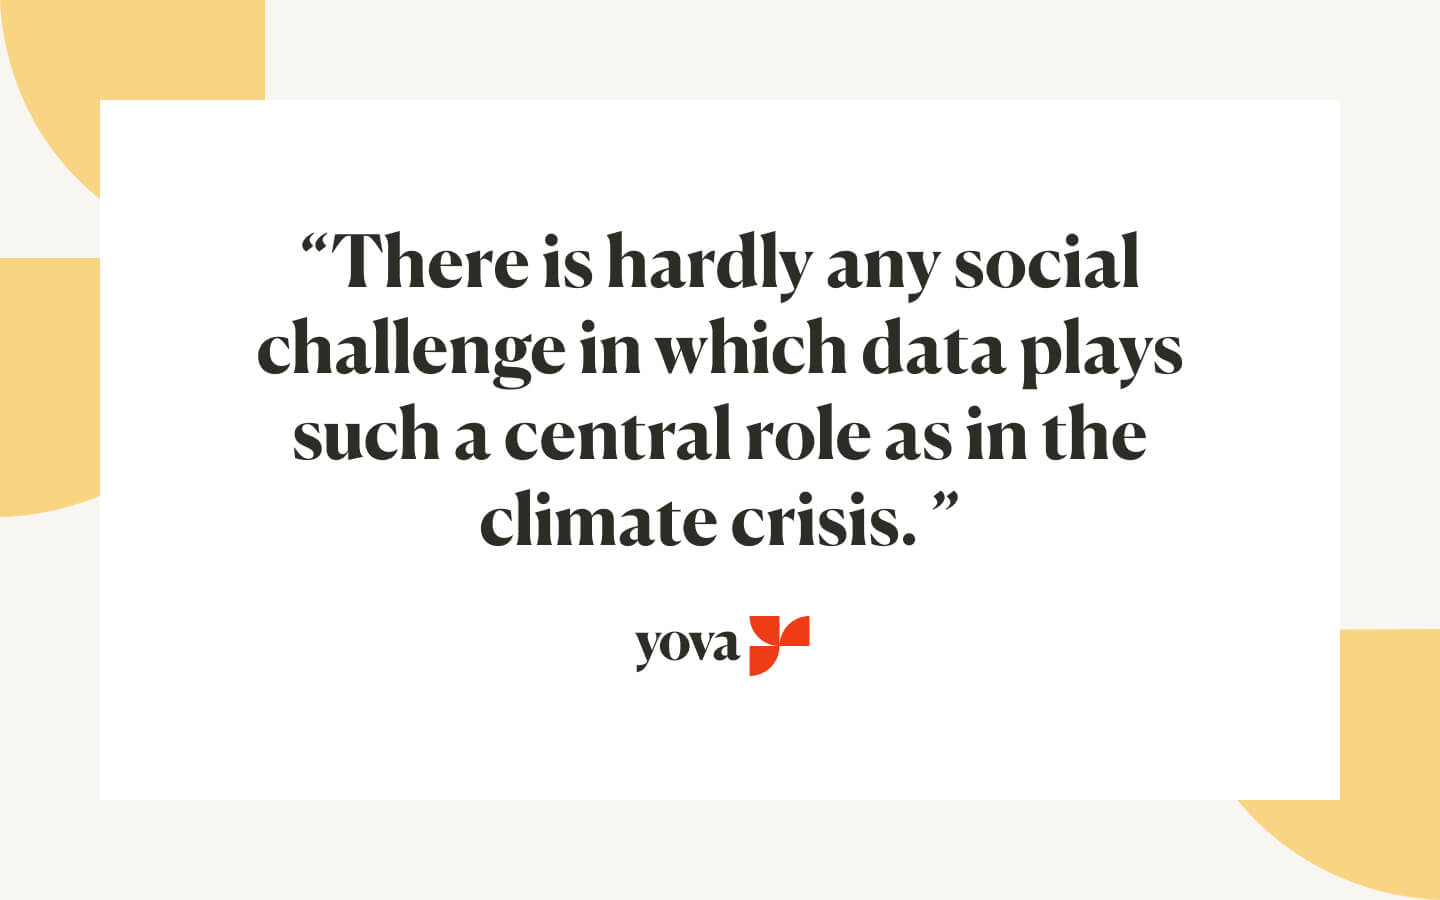 Role of data in the climate crisis